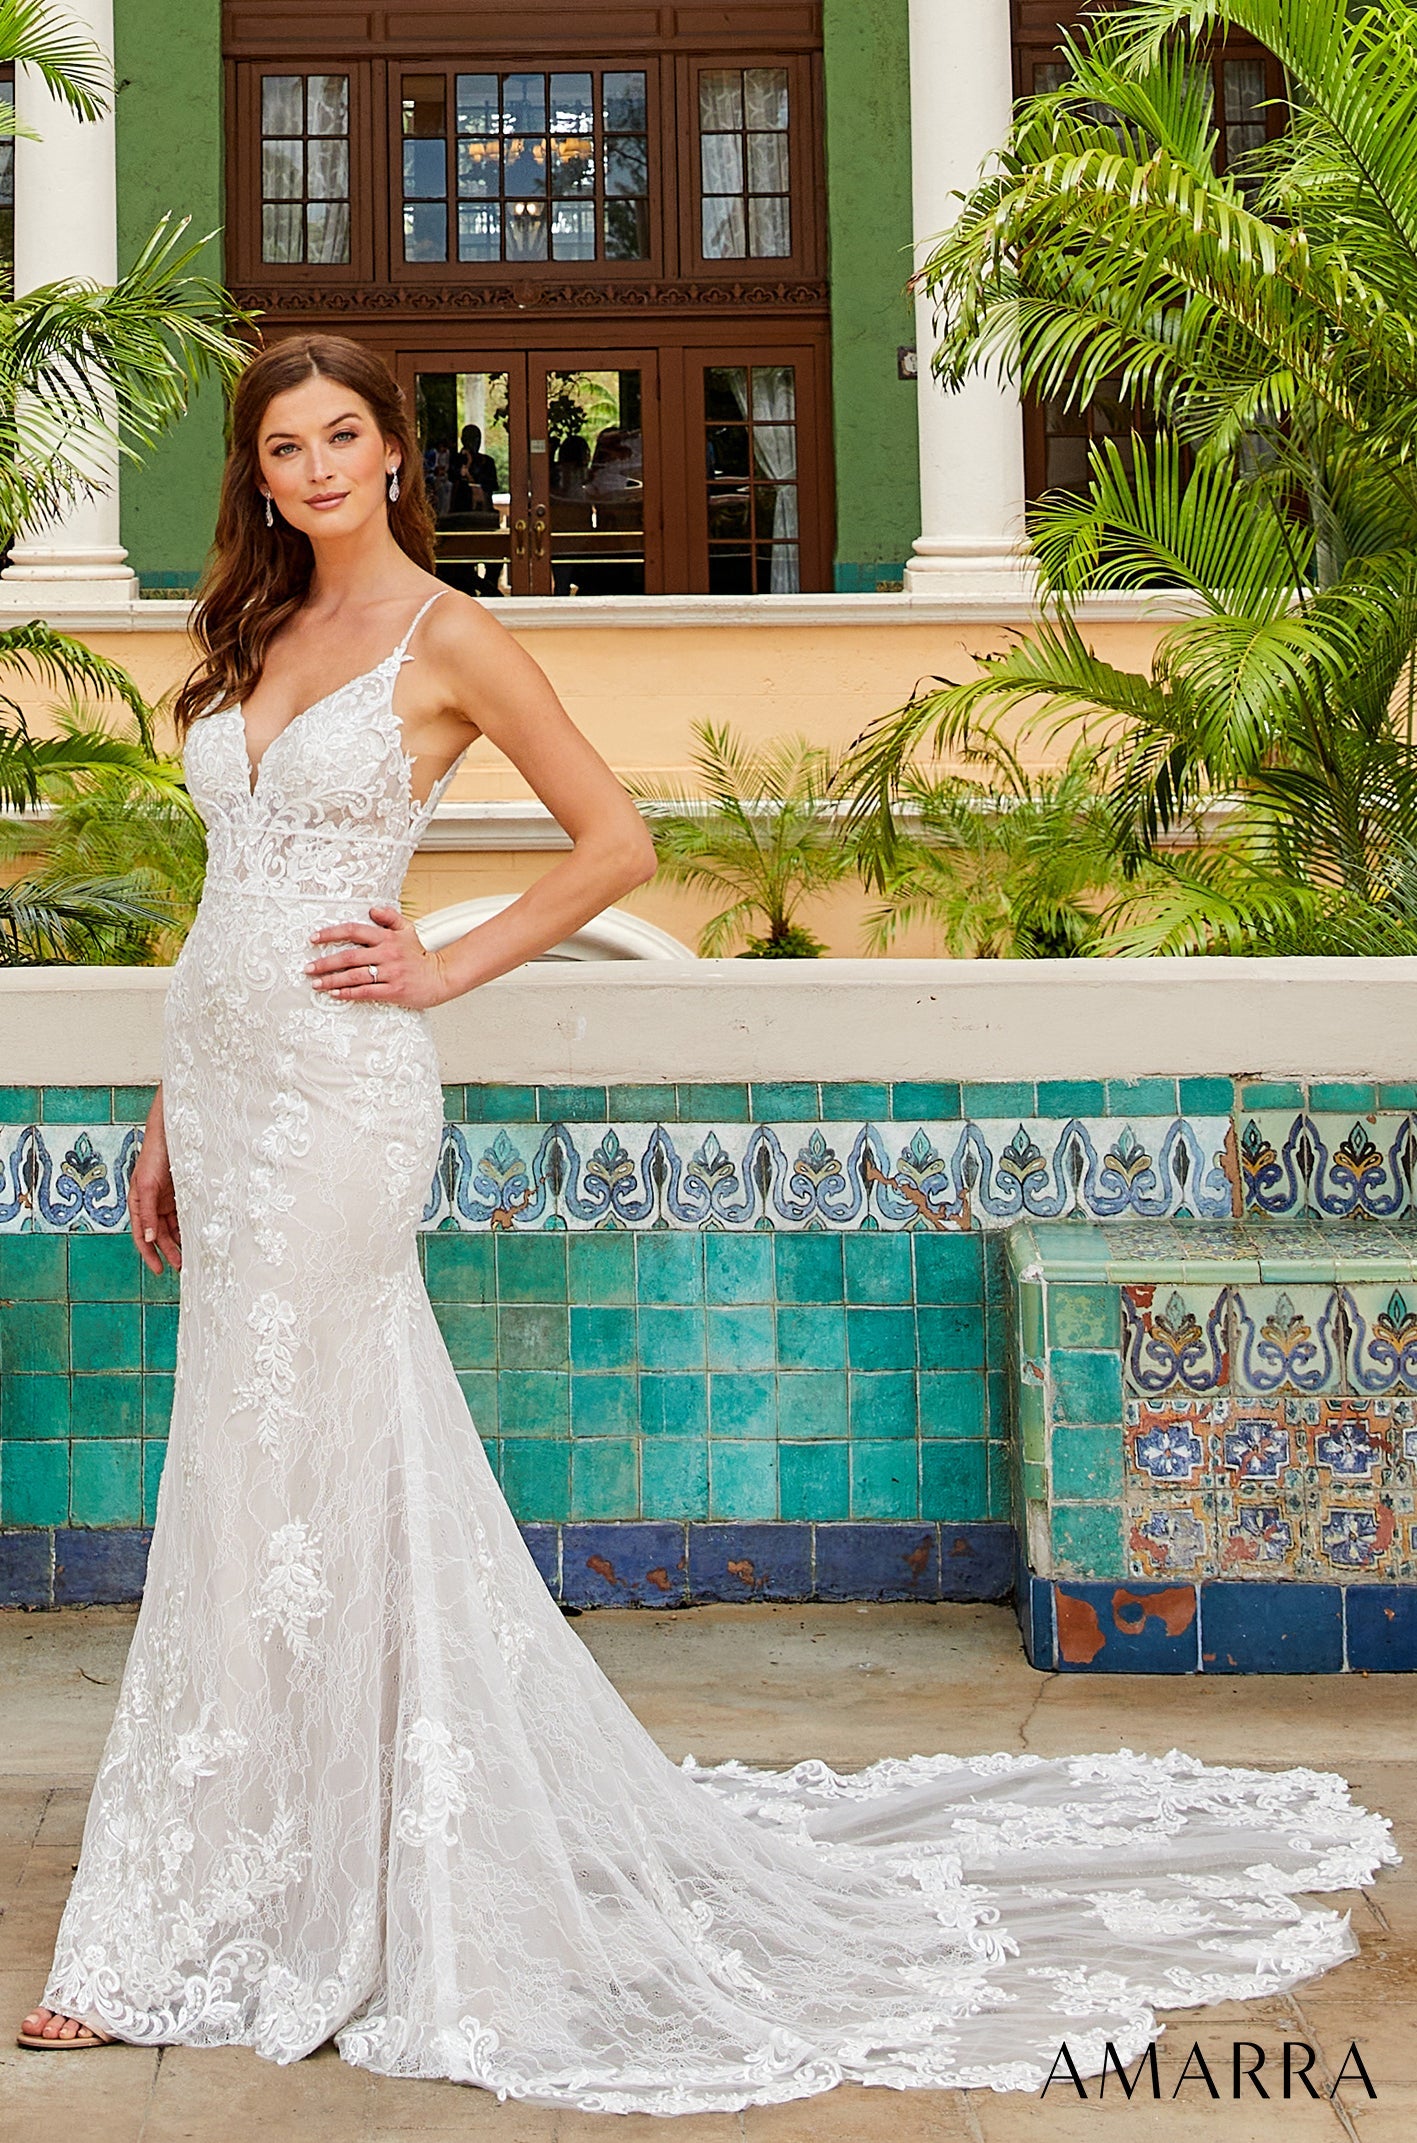 Amarra SADIE 84383 Fitted sheer lace wedding dress Bridal Gown Train V Neck Elegant Look and feel like the beautiful bride you are in this simple, yet stunning slip dress. Featuring a lovely lace design throughout, Sadie is a ravishing wedding dress that’s sure to have all eyes on you. 